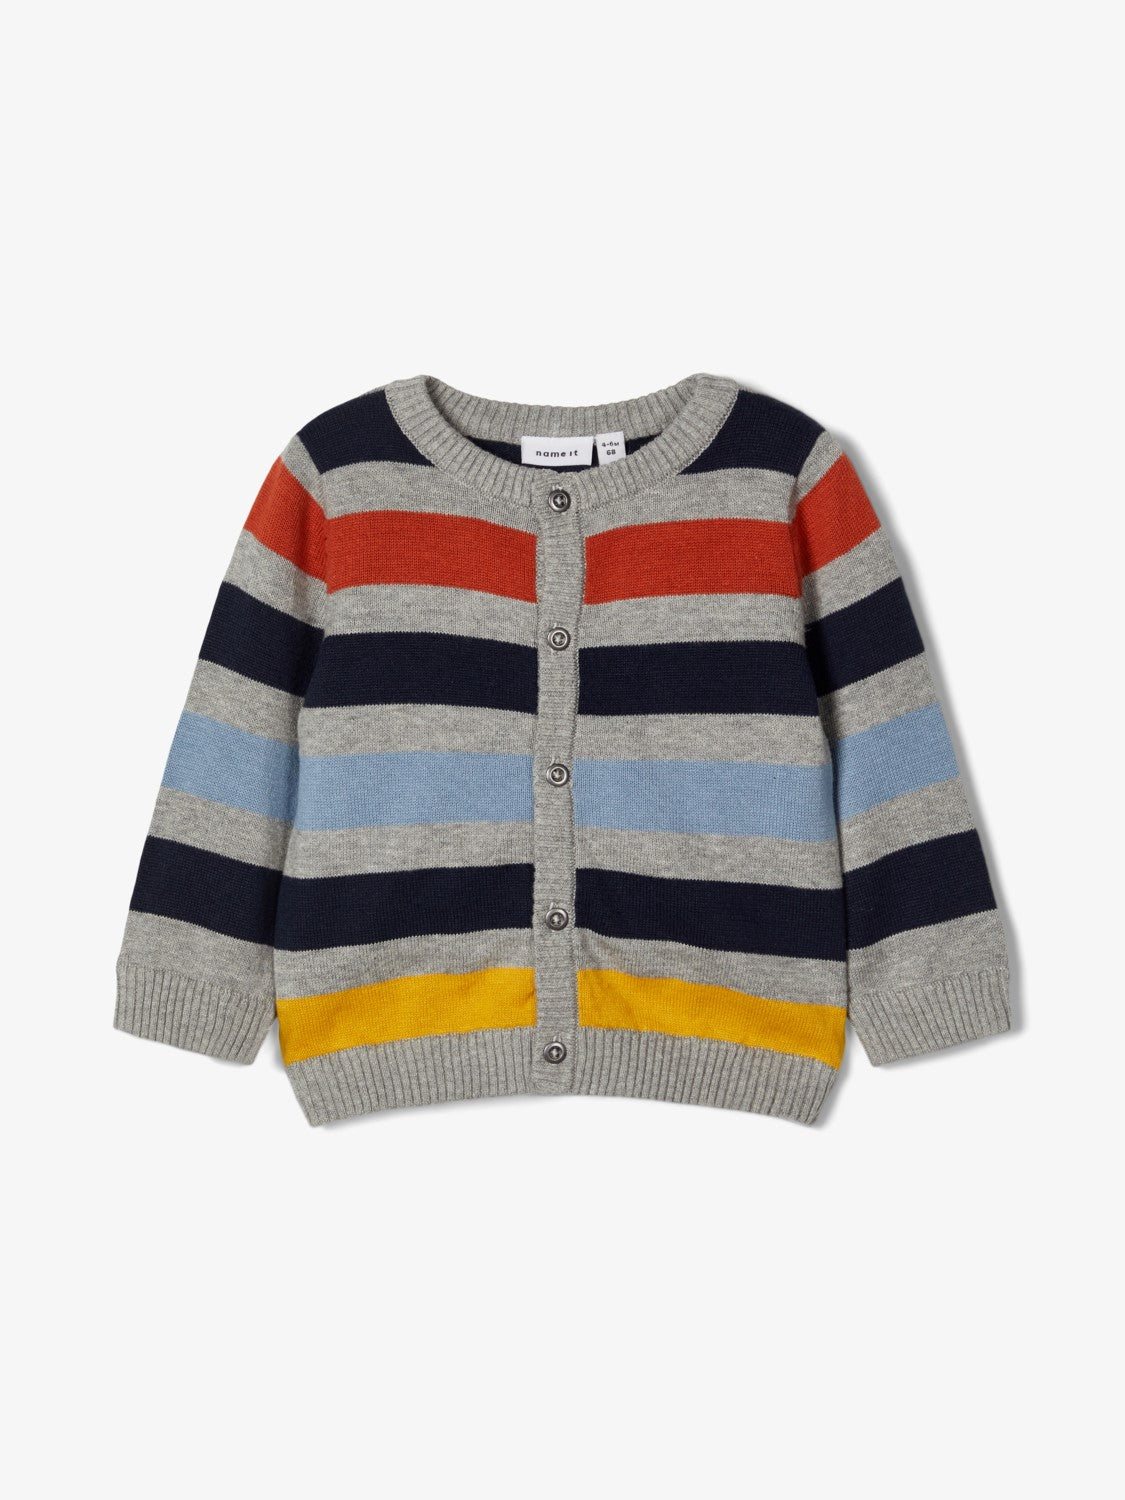 Name it Baby Boy Stripe Knitted Cardigan